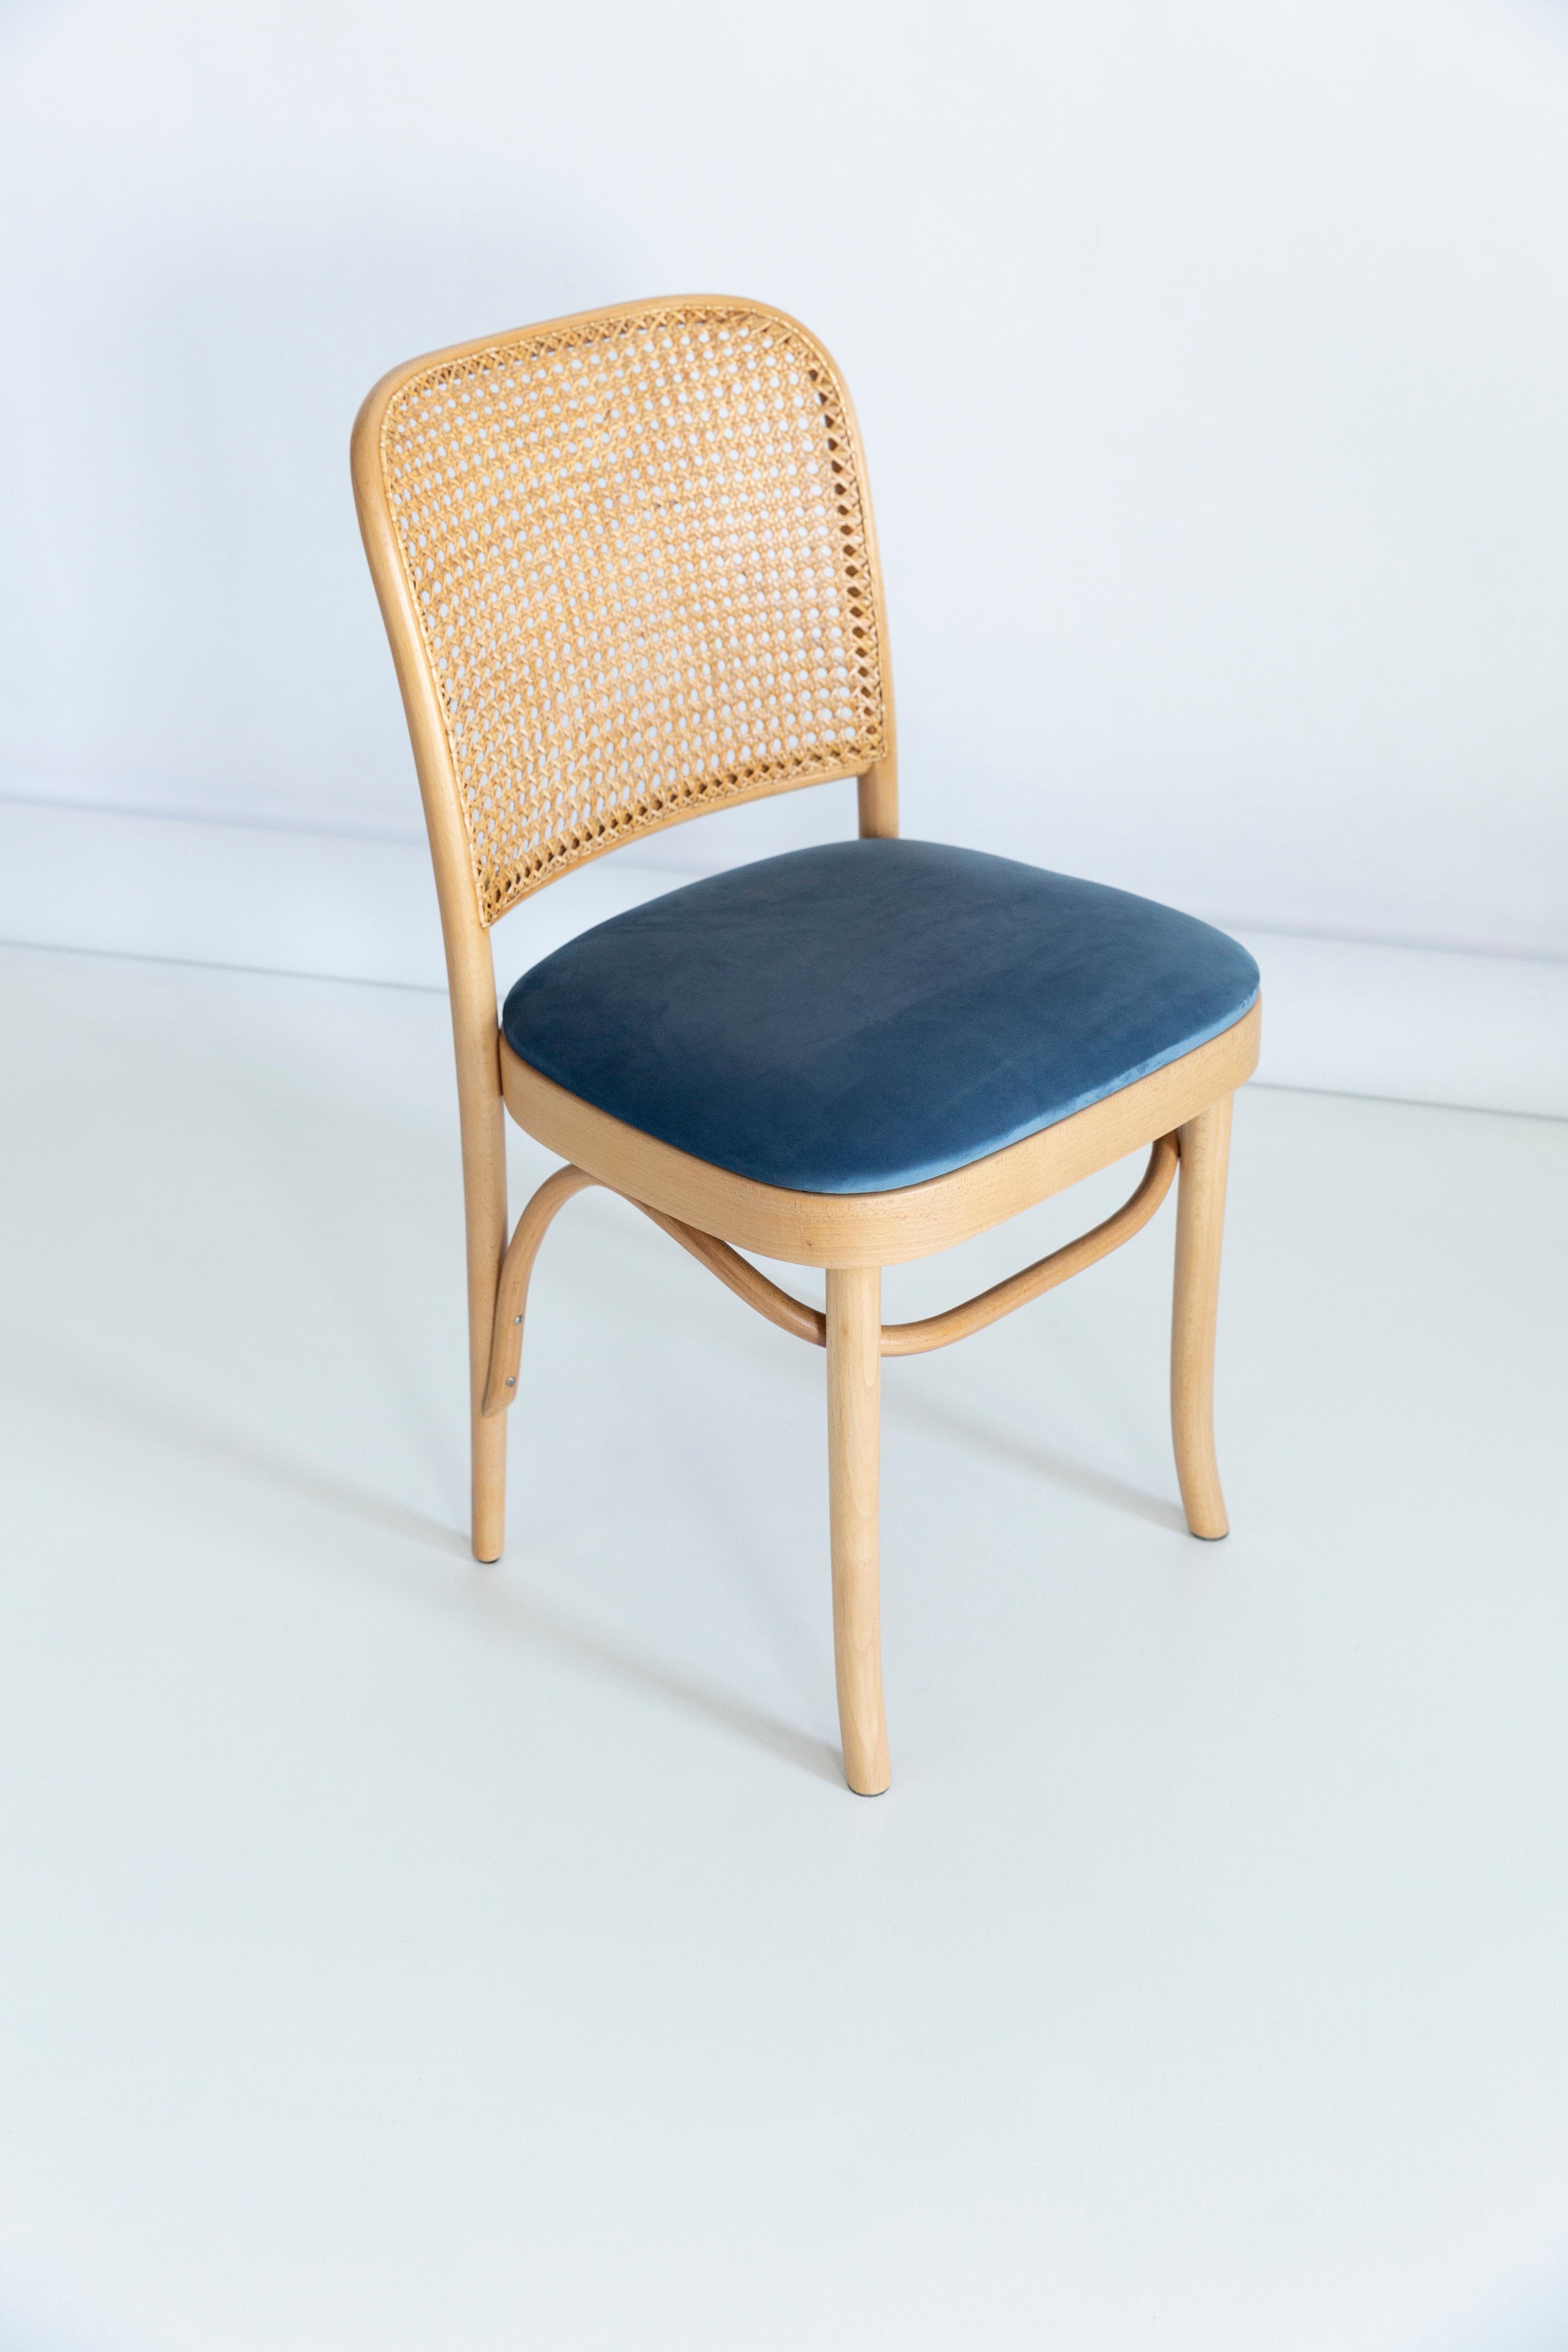 Set of Five Blue Velvet Thonet Wood Rattan Chairs, 1960s For Sale 5